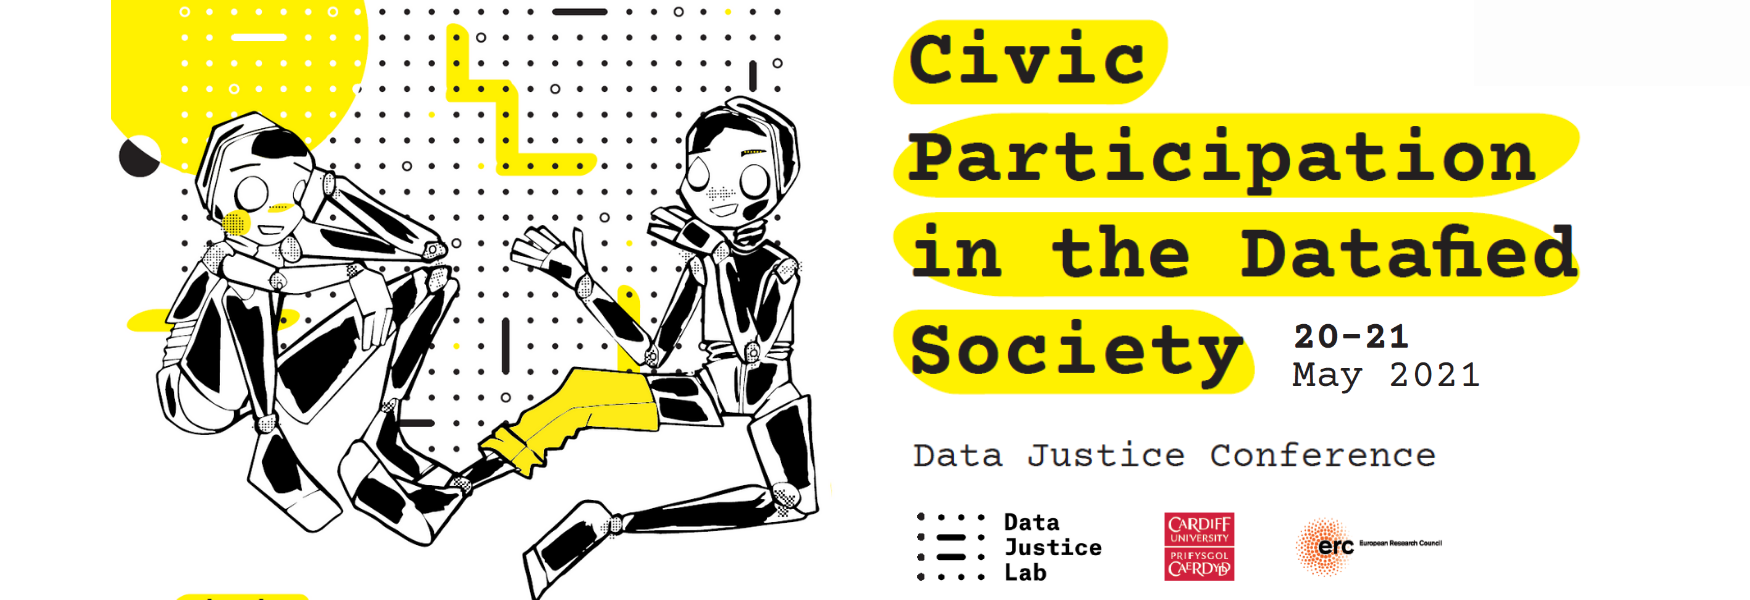 Civic Participation in the Datafied Society: Data Justice 2021